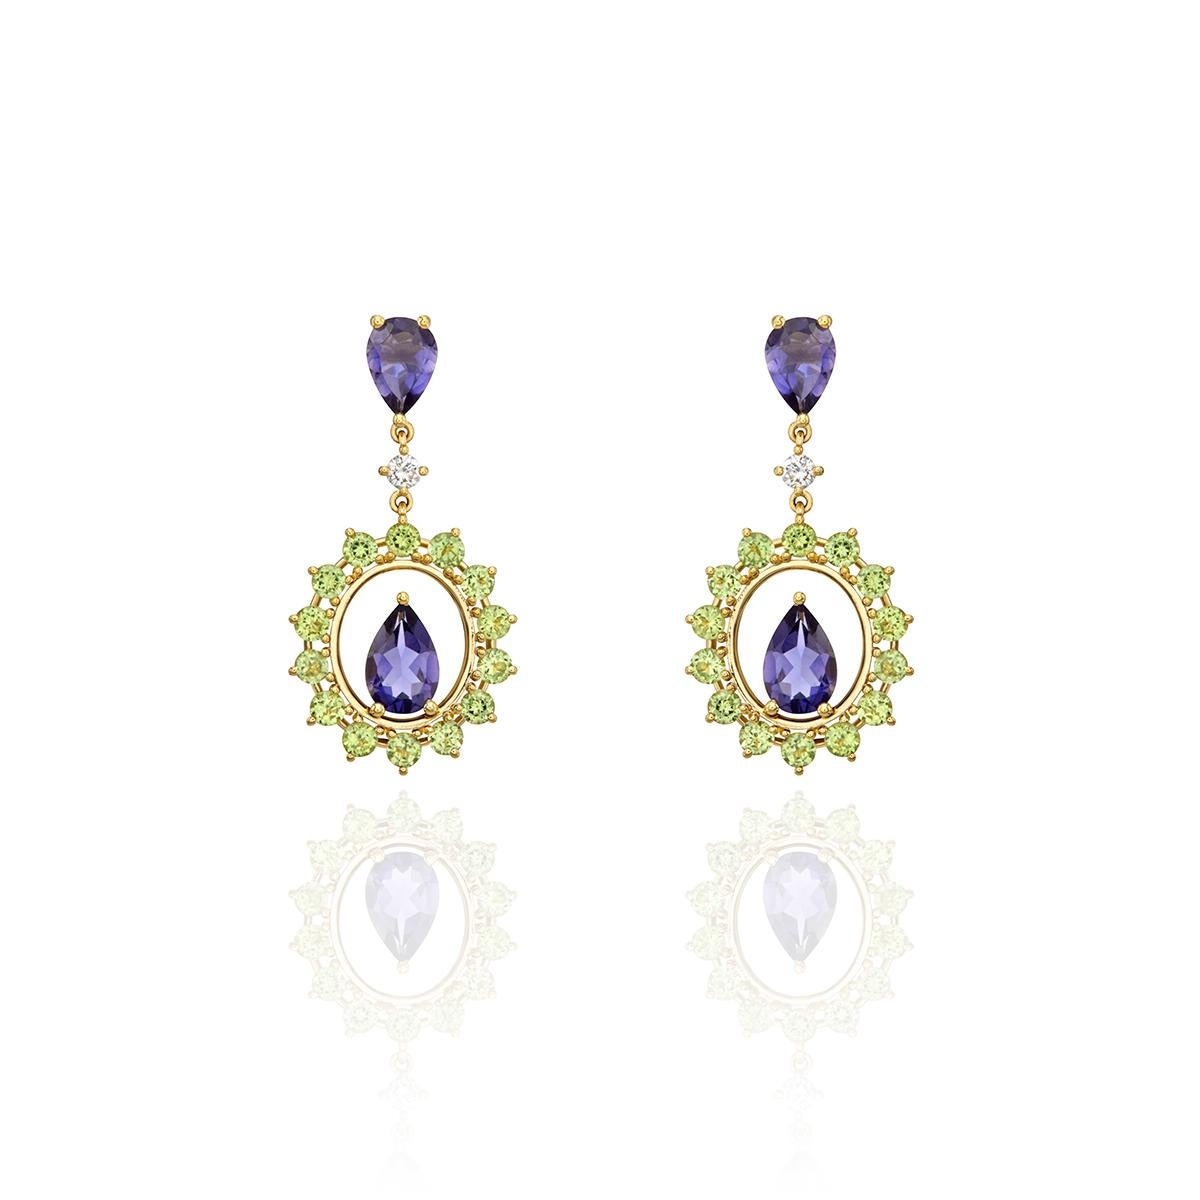 Retro Prong Oval Shape Dangle Earrings in 18kt Gold with Iolite Peridot and Diamonds For Sale